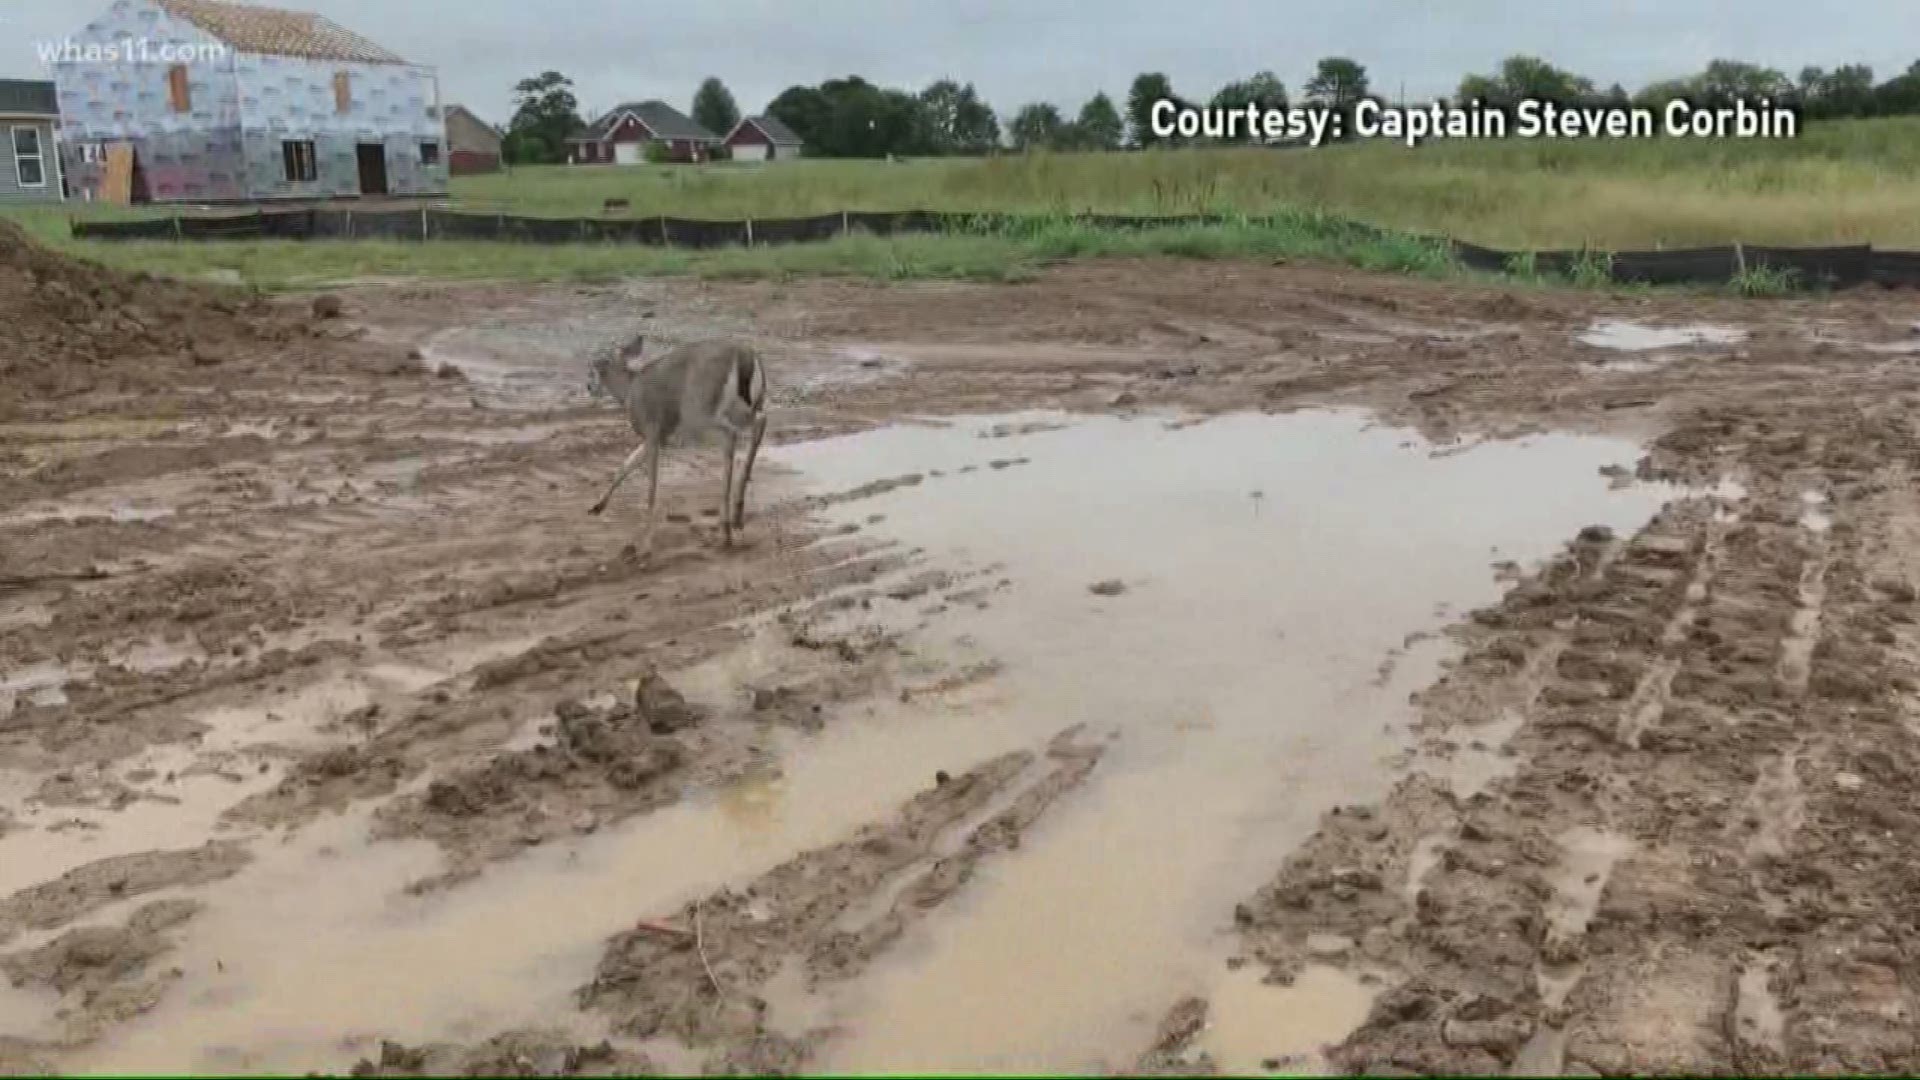 Zoneton firefighters helped two deer trapped in a flooded portion of a home under construction near Shepherdsville.